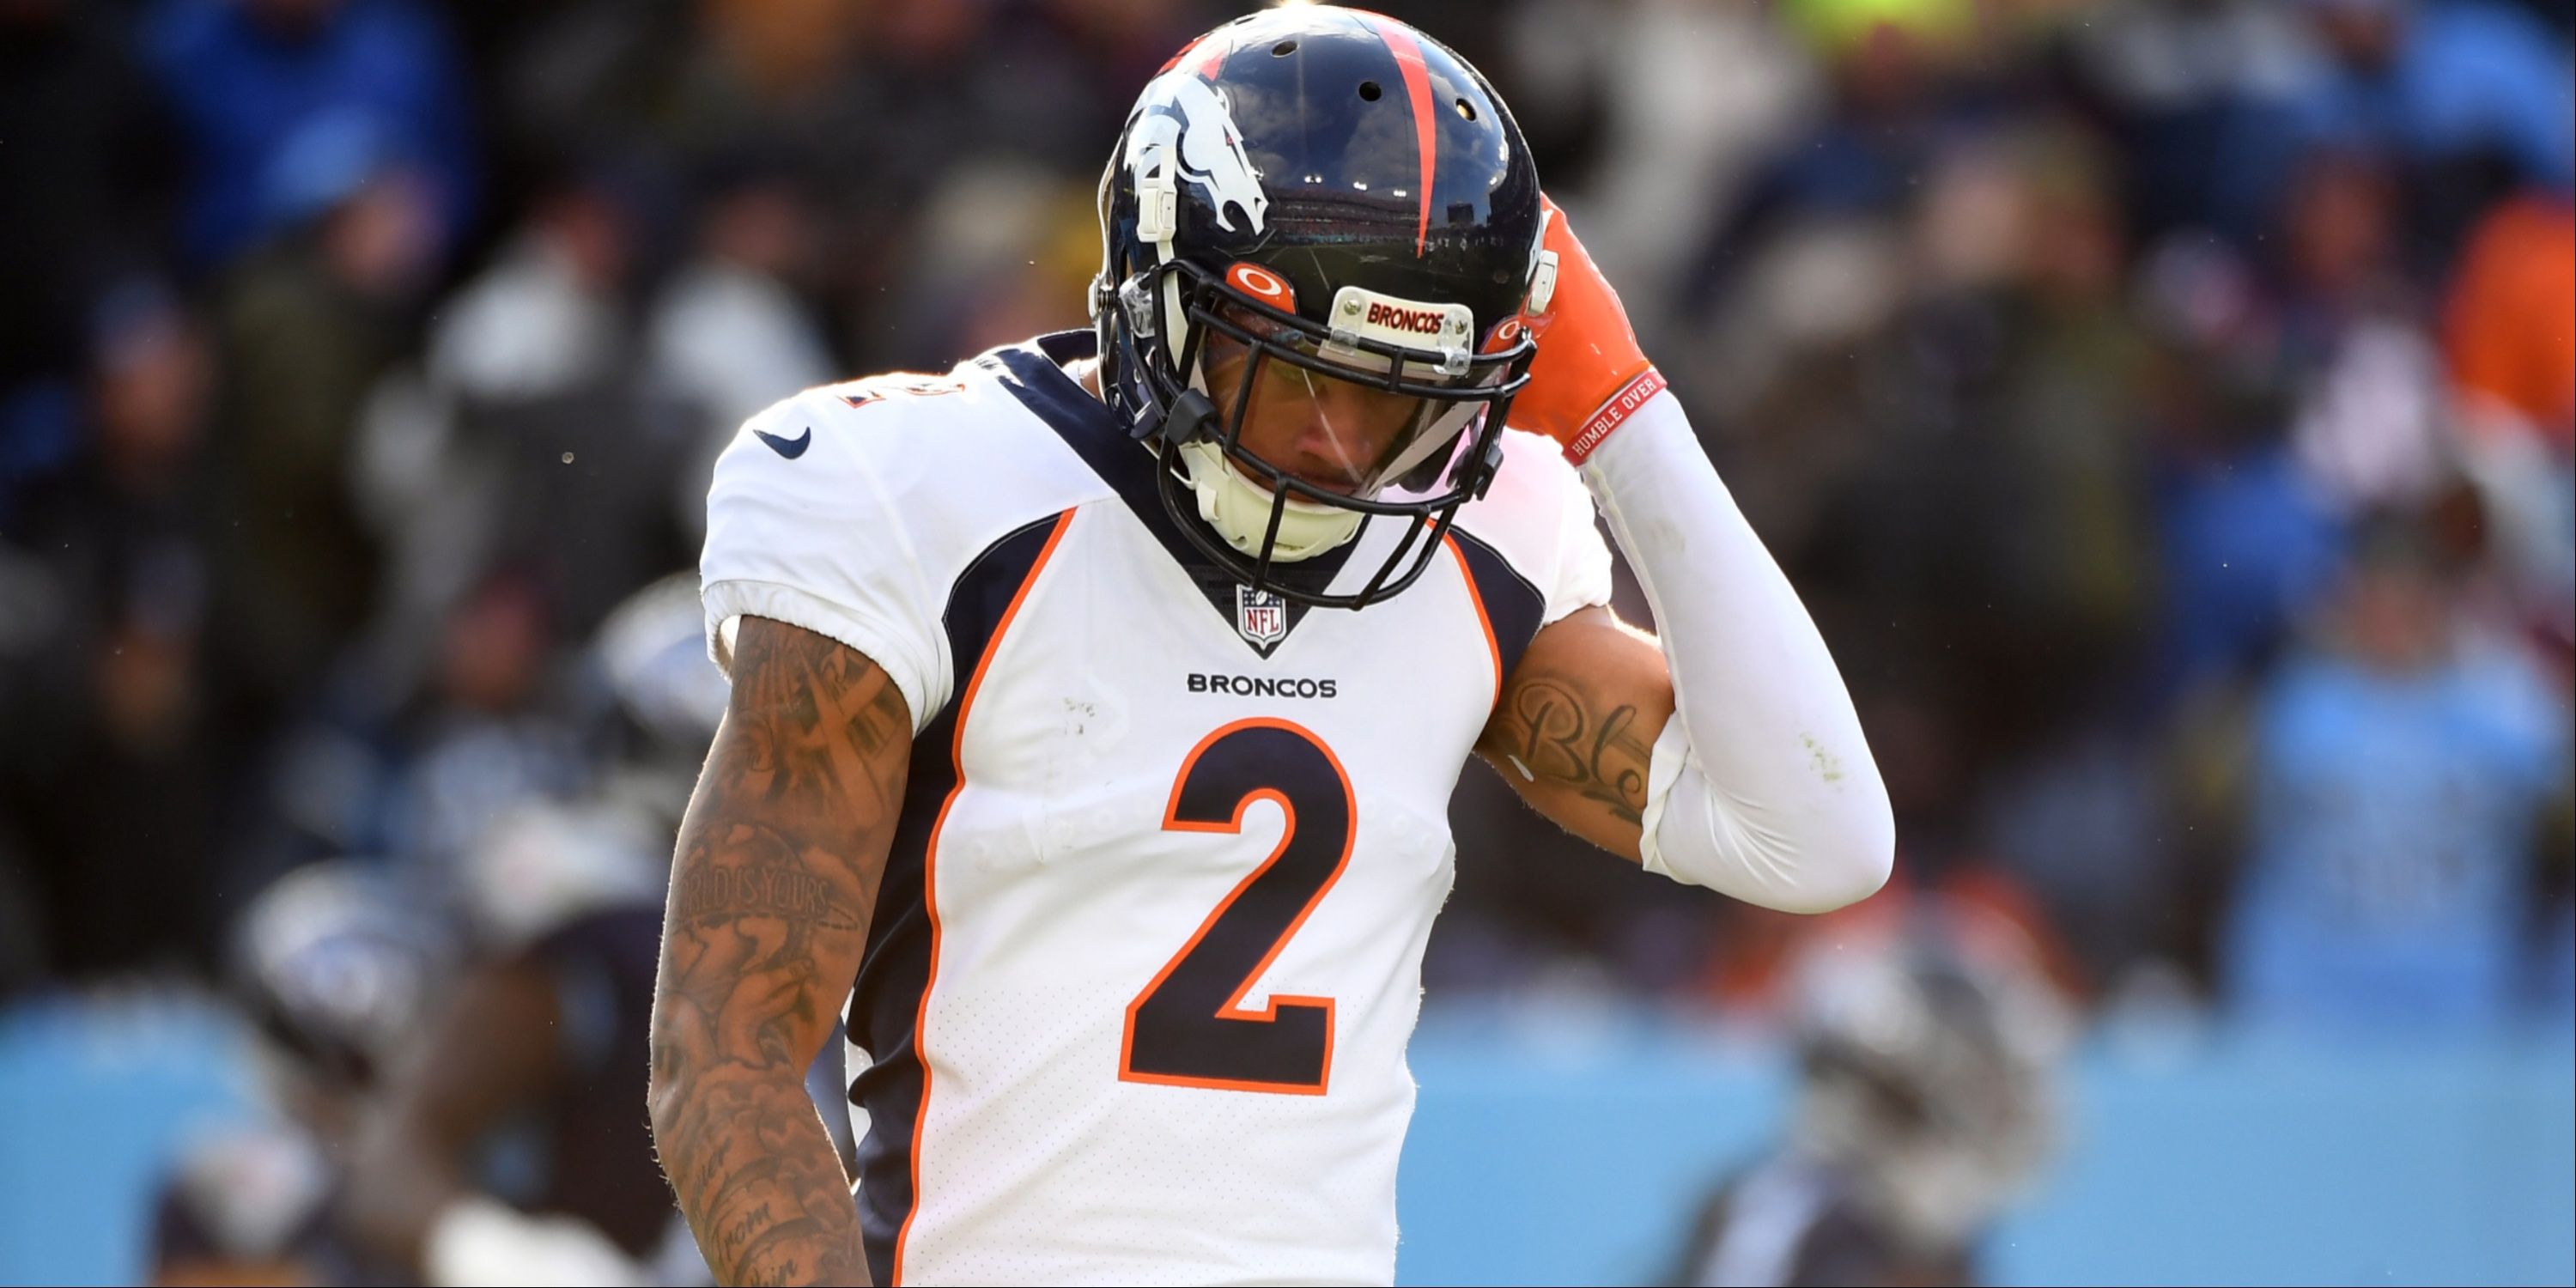 Broncos' Jaleel McLaughlin 'Pissed' About Low Expectations